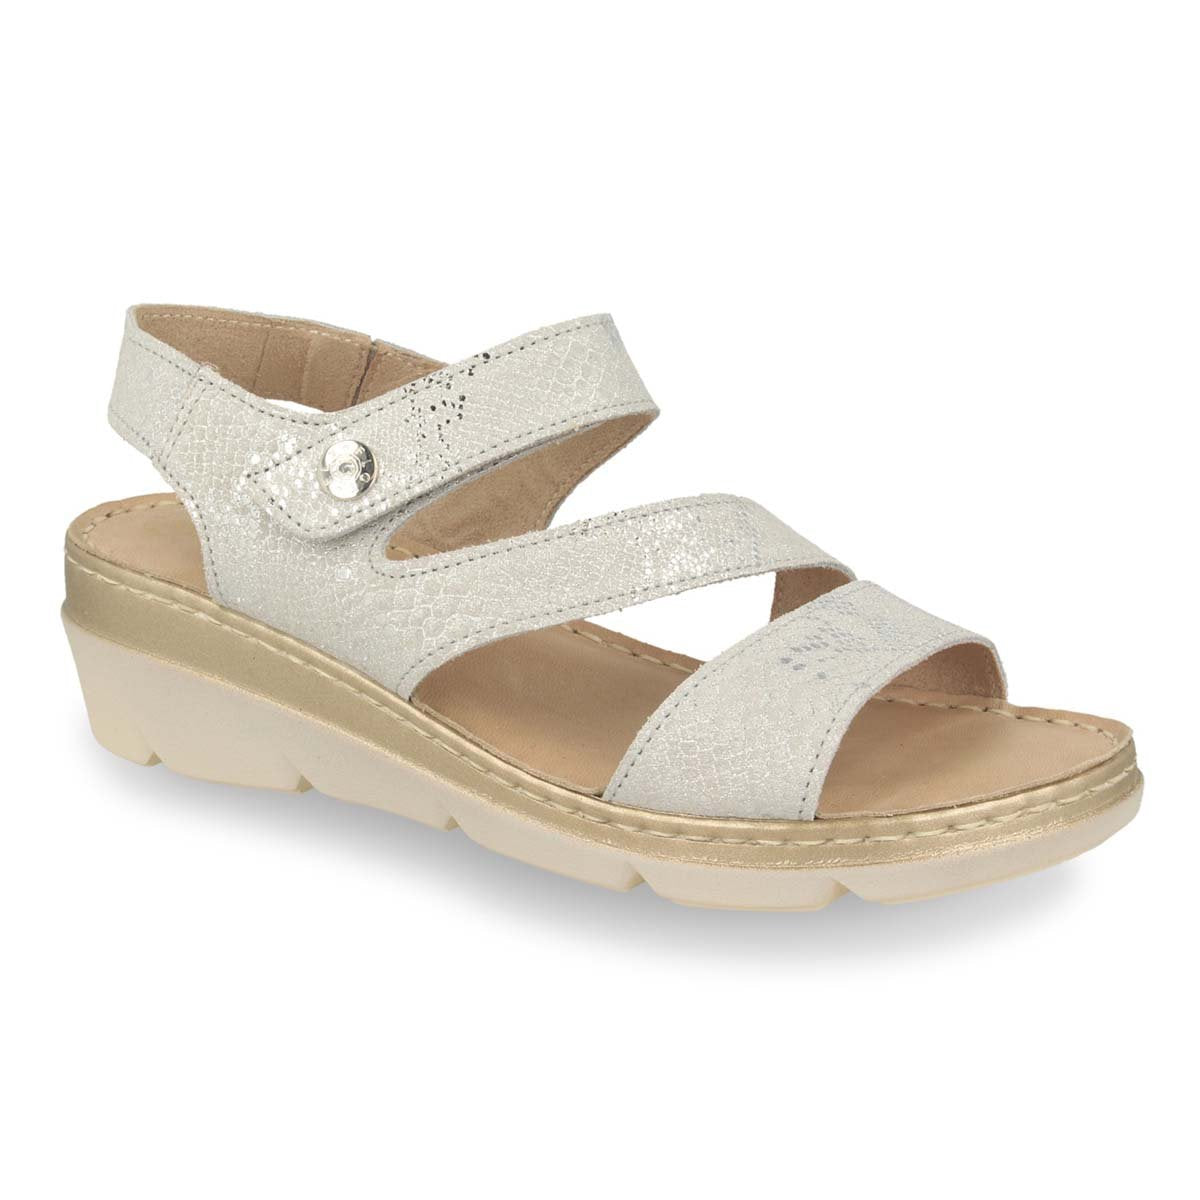 Photo of the Leather Woman Sandal Light Grey  (71f22mg)